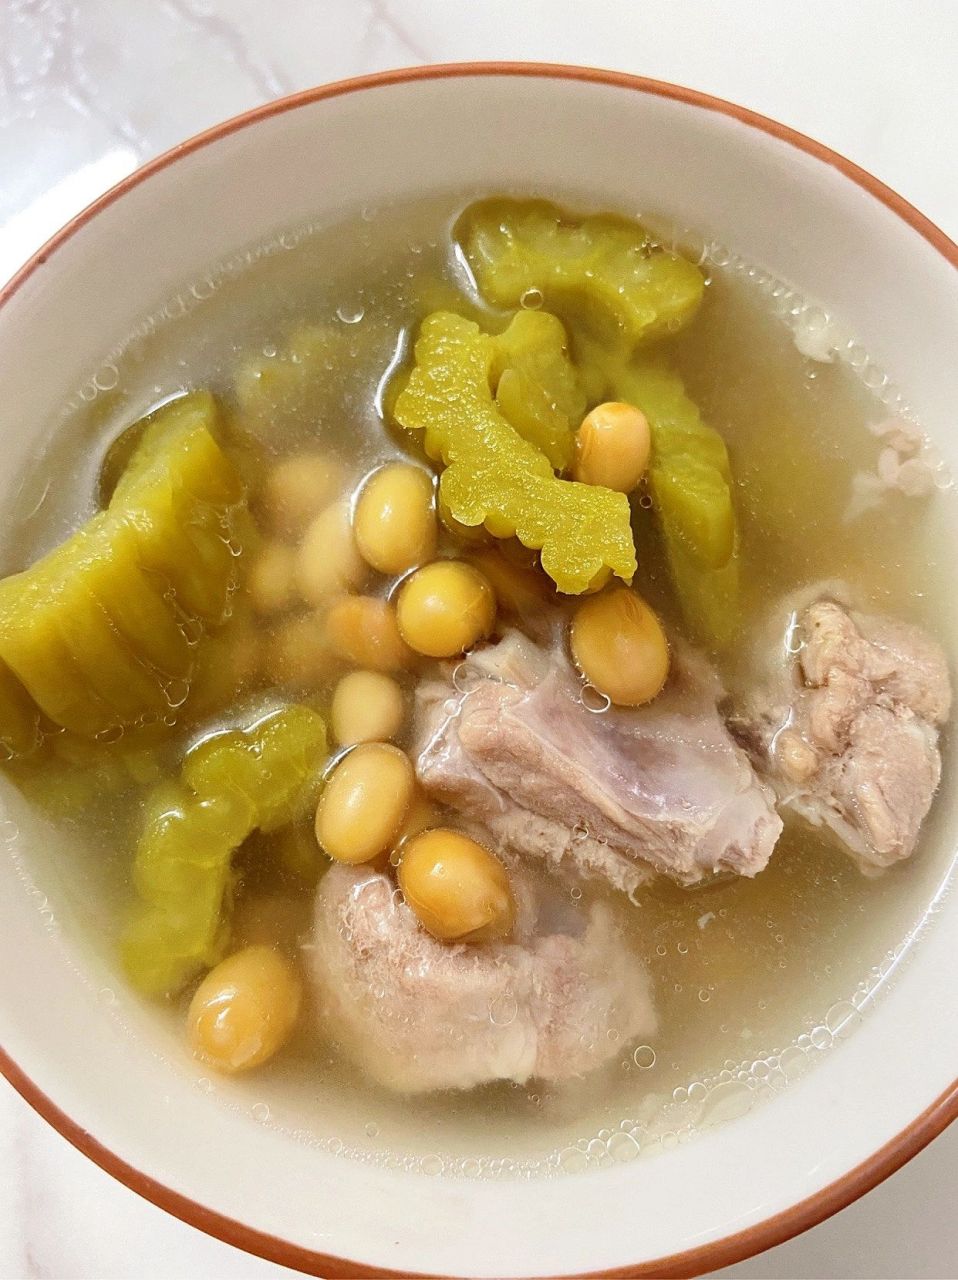 What is Bitter Melon and Pork Ribs Soup?